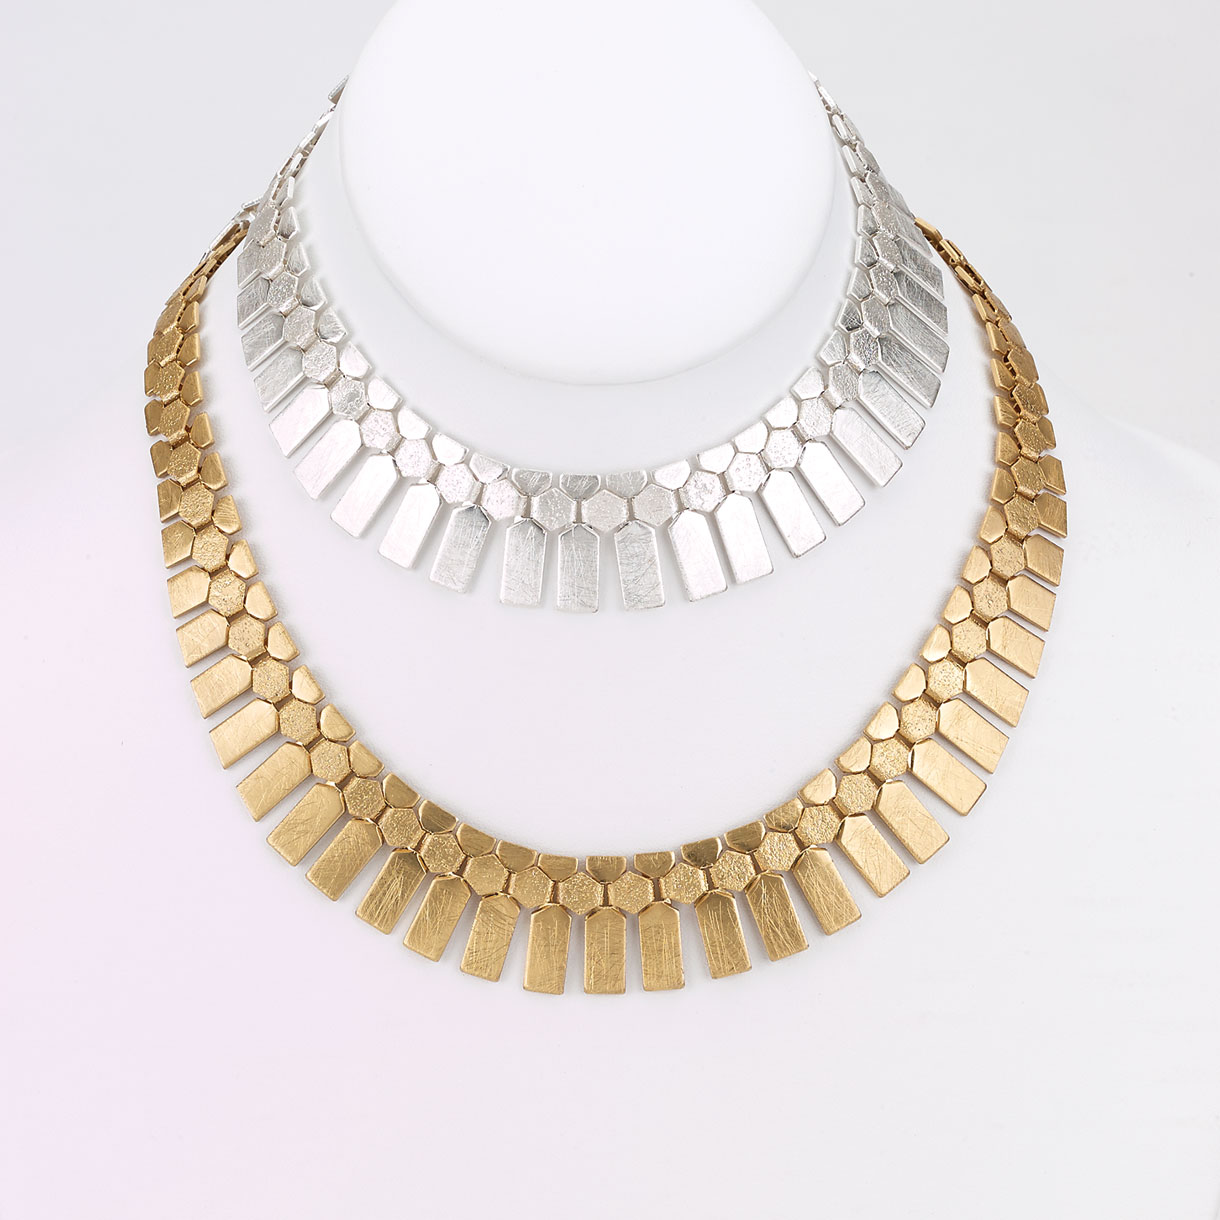 Brushed Flat Serpentine Necklace